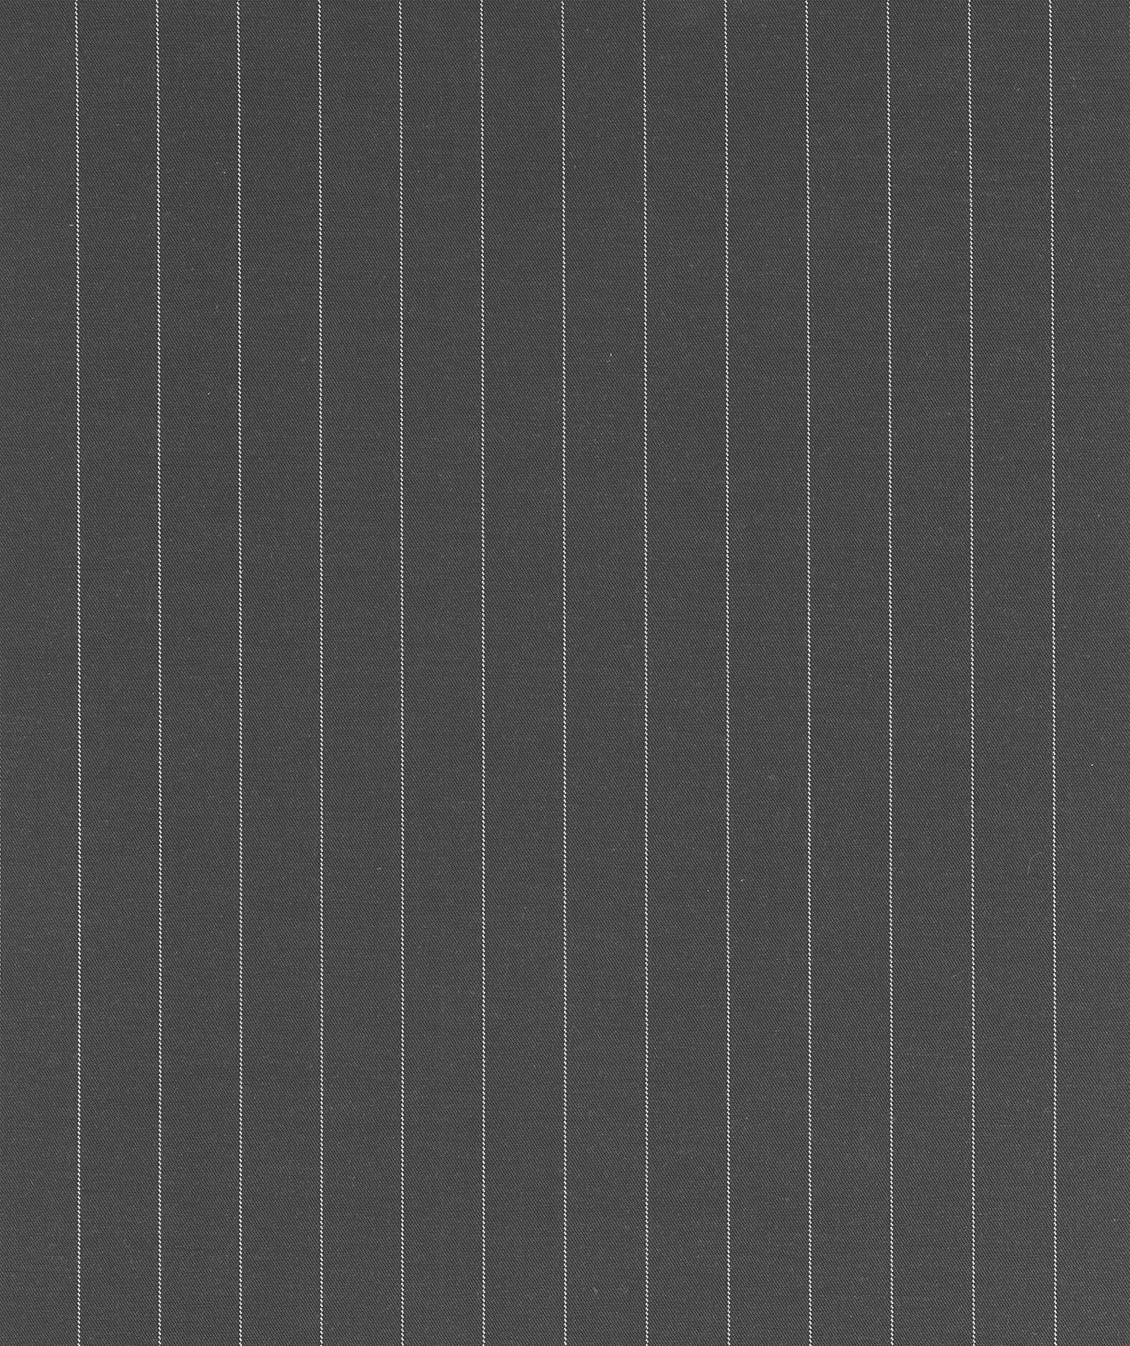 Striped wallpaper, vertical white lines on a grey background, fabric effect